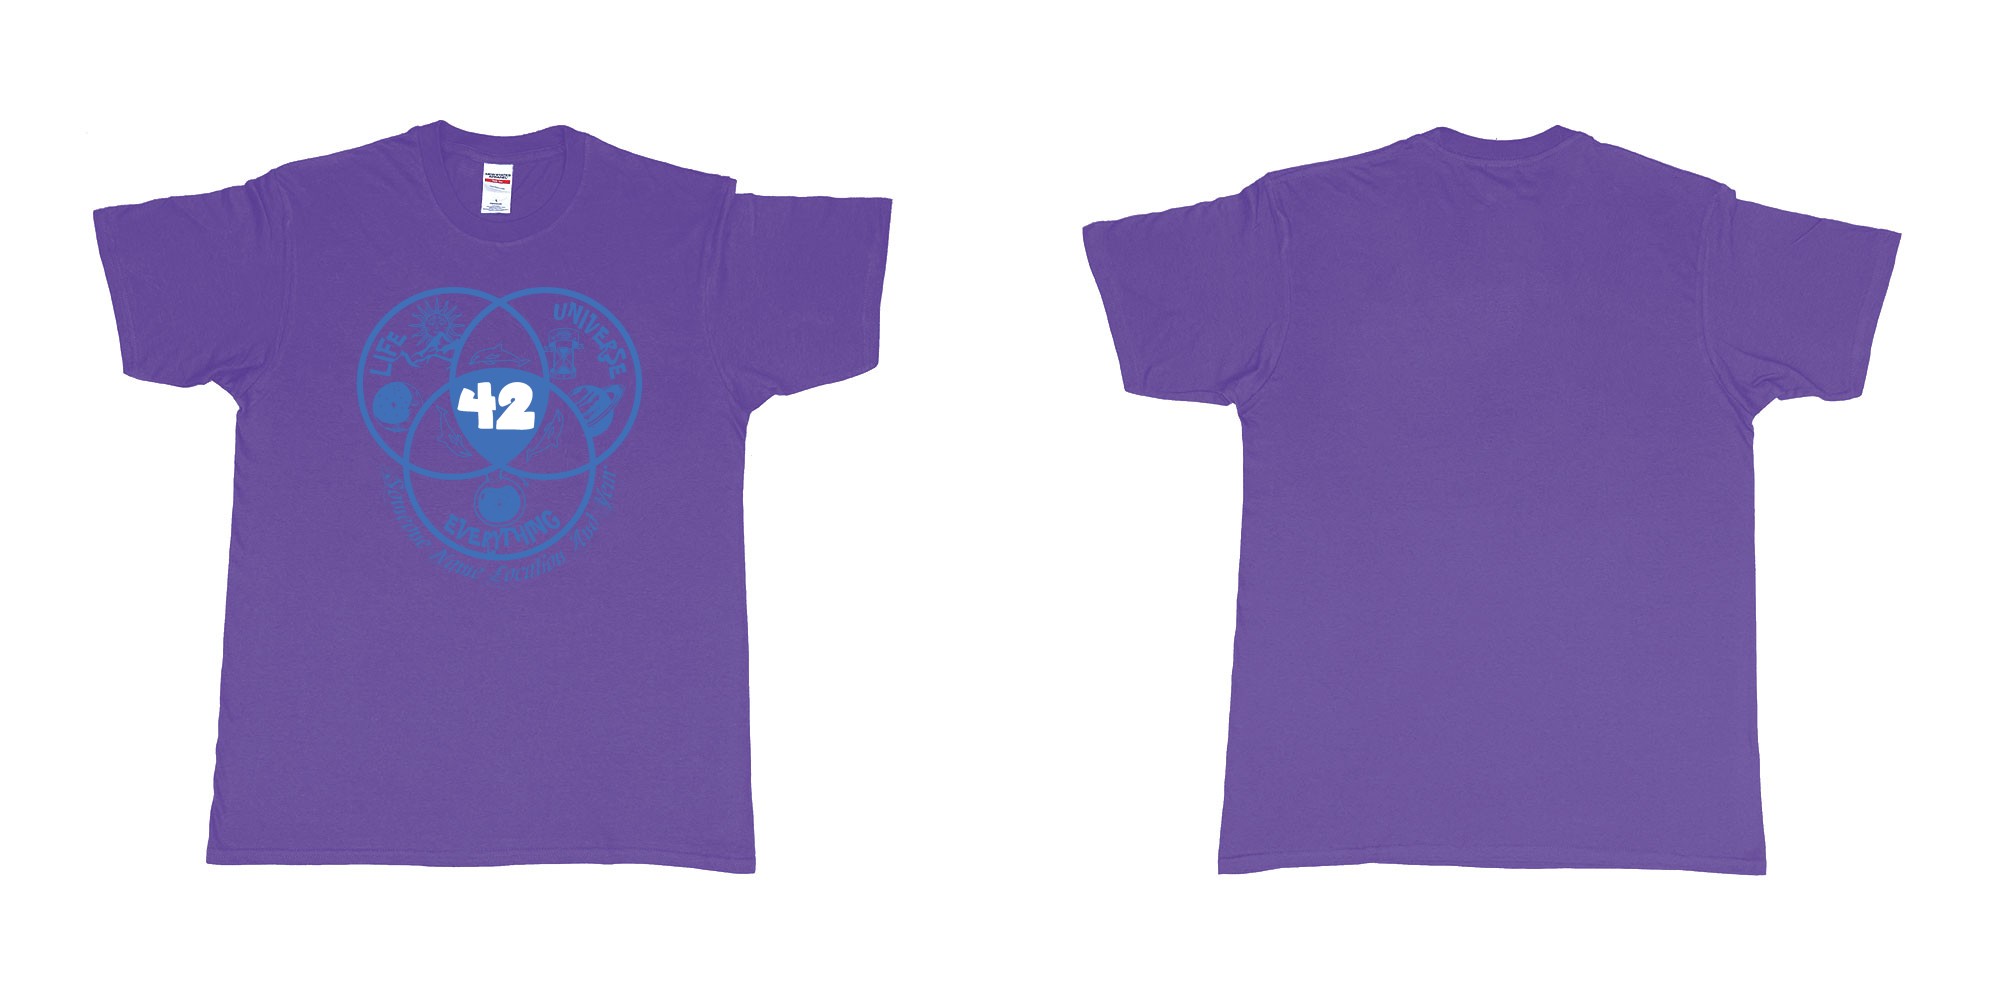 Custom tshirt design 42 everything in fabric color purple choice your own text made in Bali by The Pirate Way